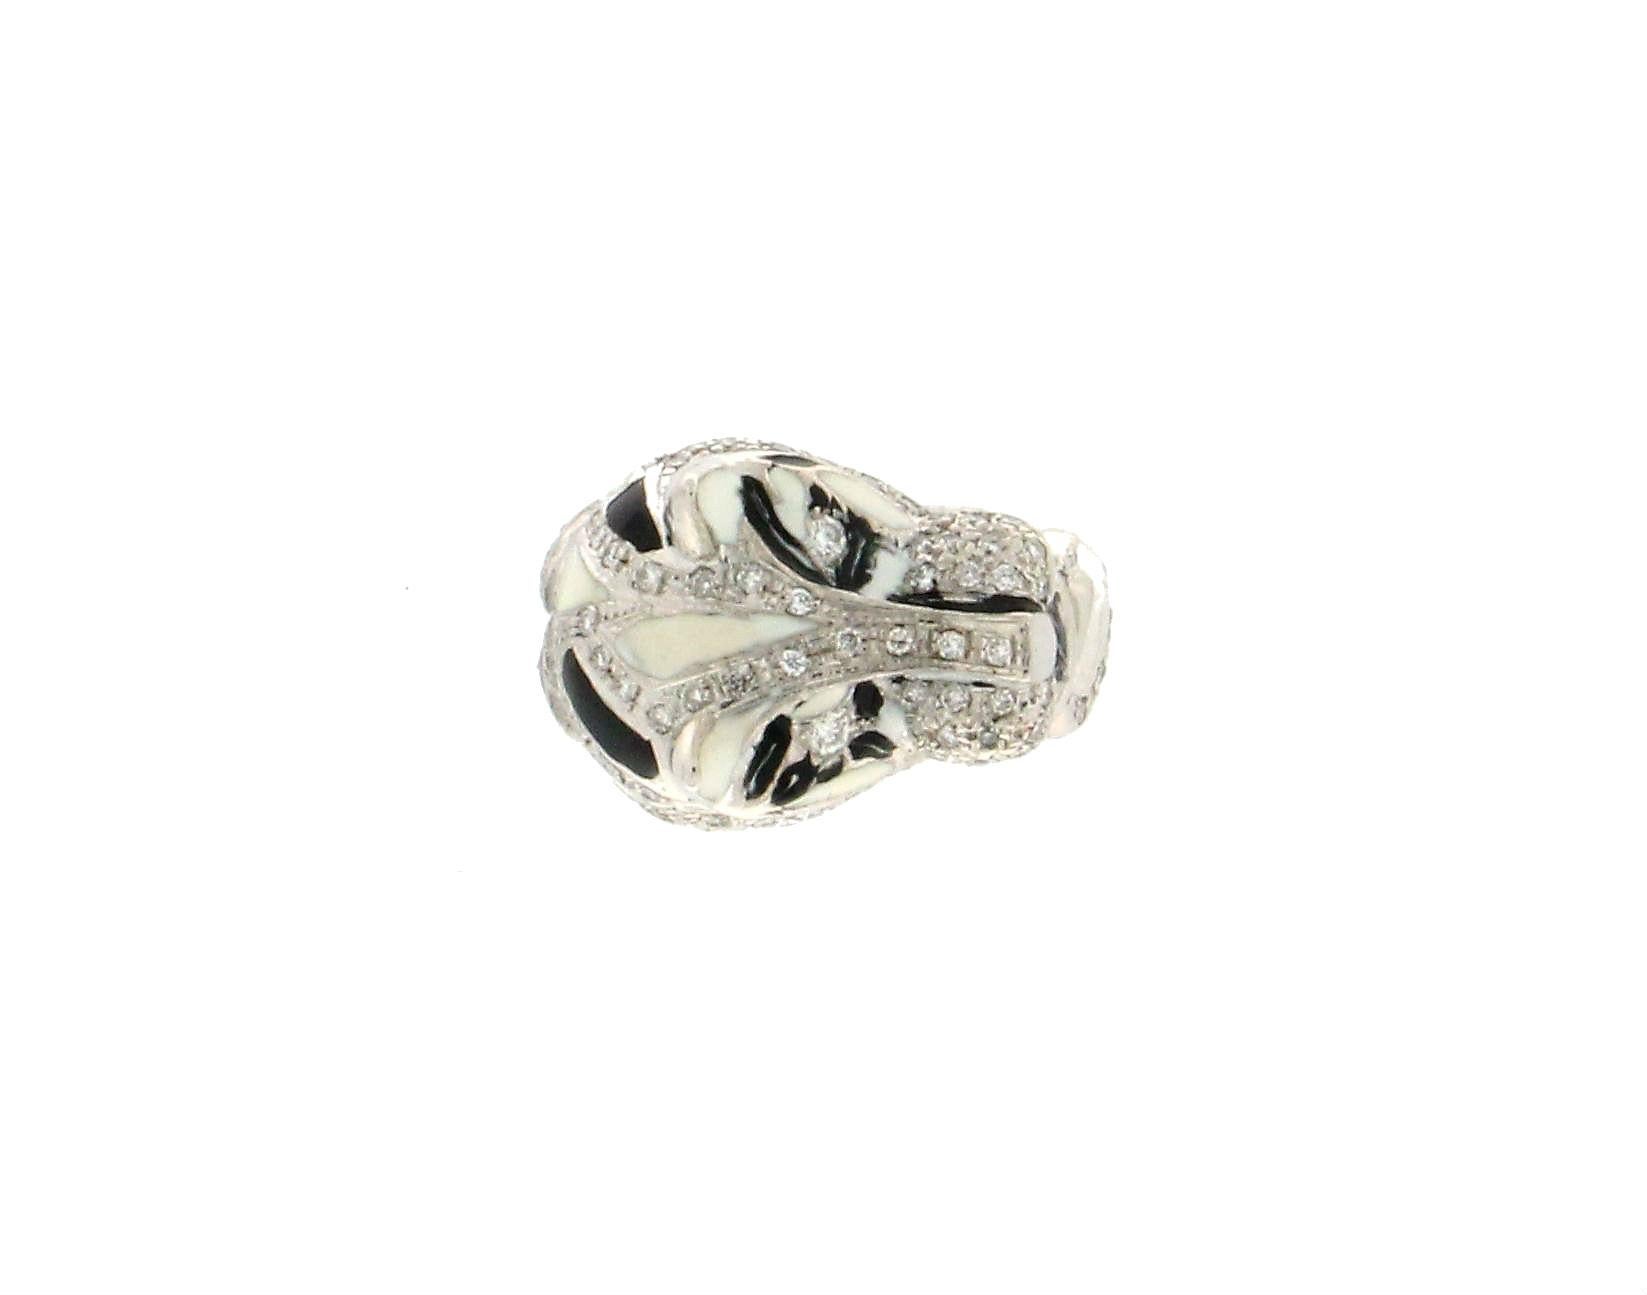 18 karat white gold cocktail ring. Cougar Handmade by our artisans assembled with diamonds and enamel.

Ring weight 23.50 grams
Diamonds weight 1 karat
Ring size 14.50 Ita 7.20 Us
(all rings are can be resized)